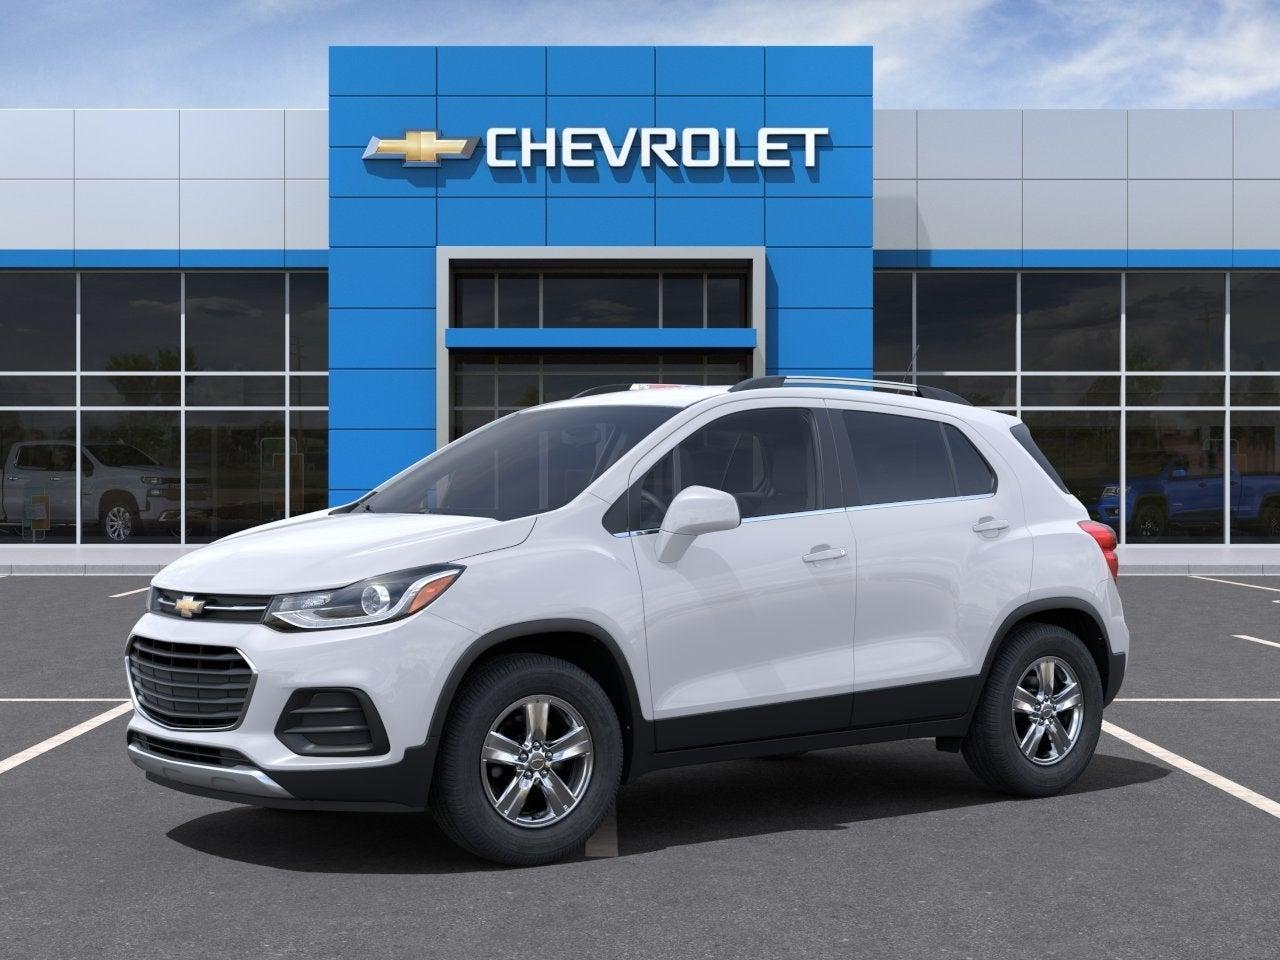 2022 Chevrolet Trax Photo in Wooster, OH 44691